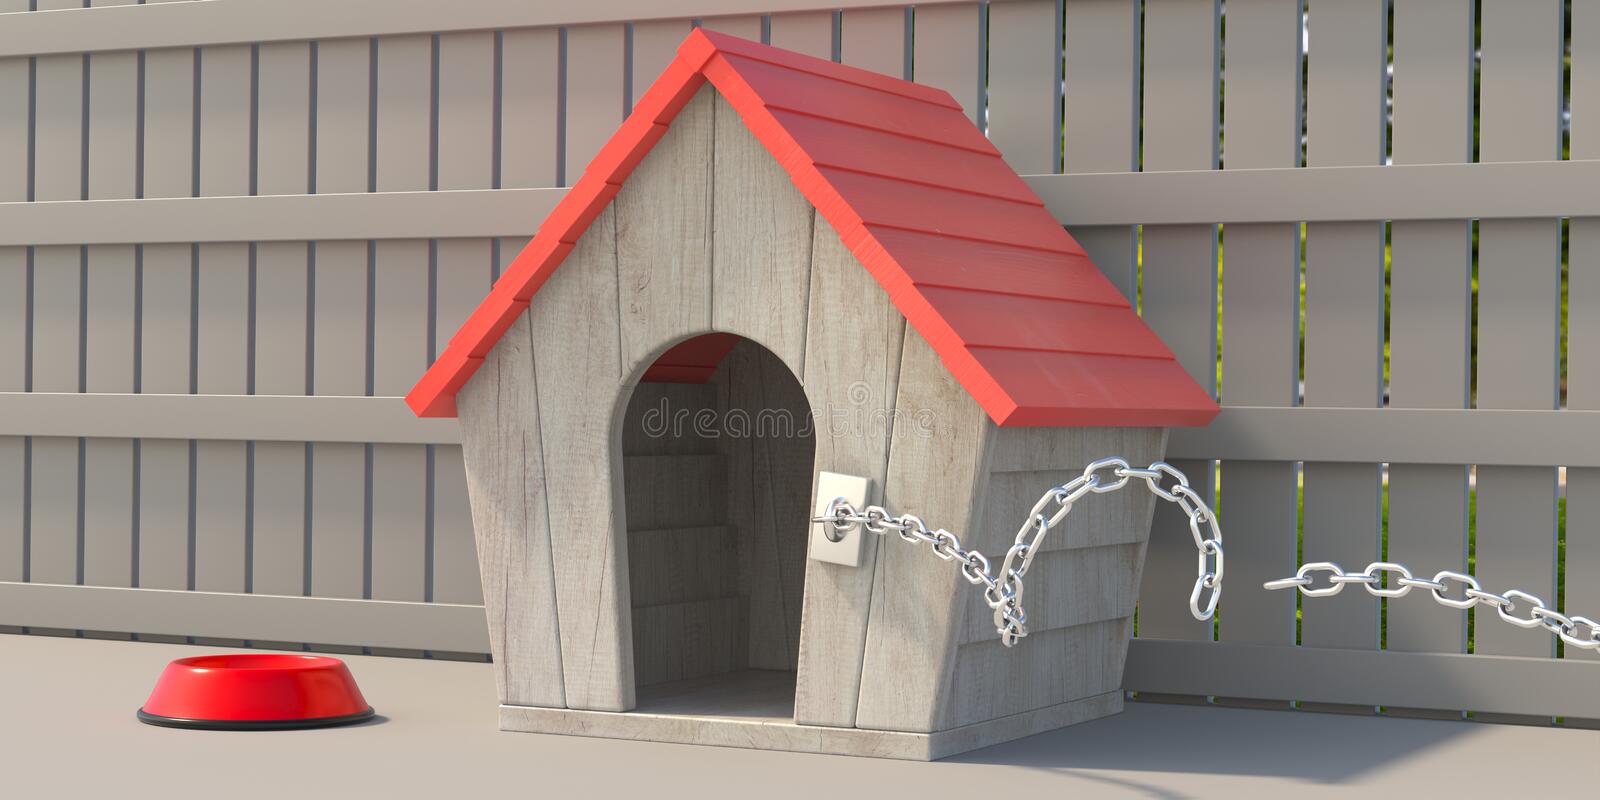 dog-escape-doghouse-empty-chain-broken-wooden-fence-background-d-illustration-cabin-domestic-a...jpg